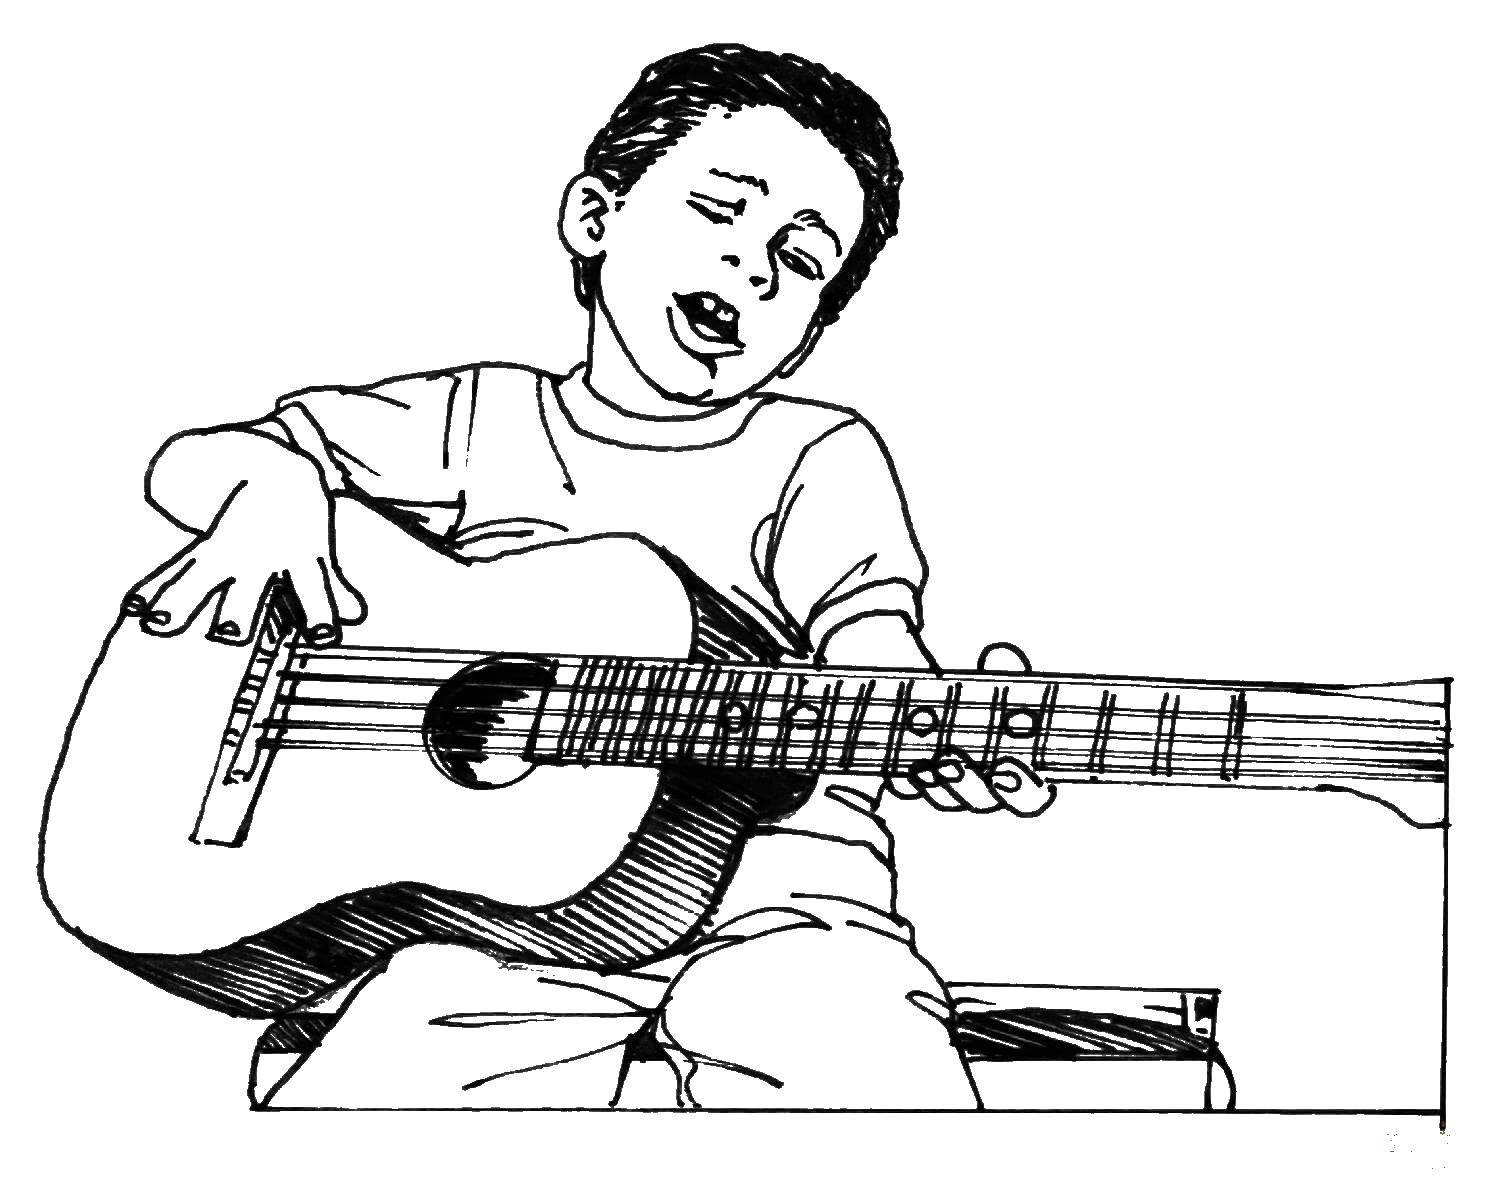 Coloring The little guitarist. Category Music. Tags:  Music, instrument, musician, note.